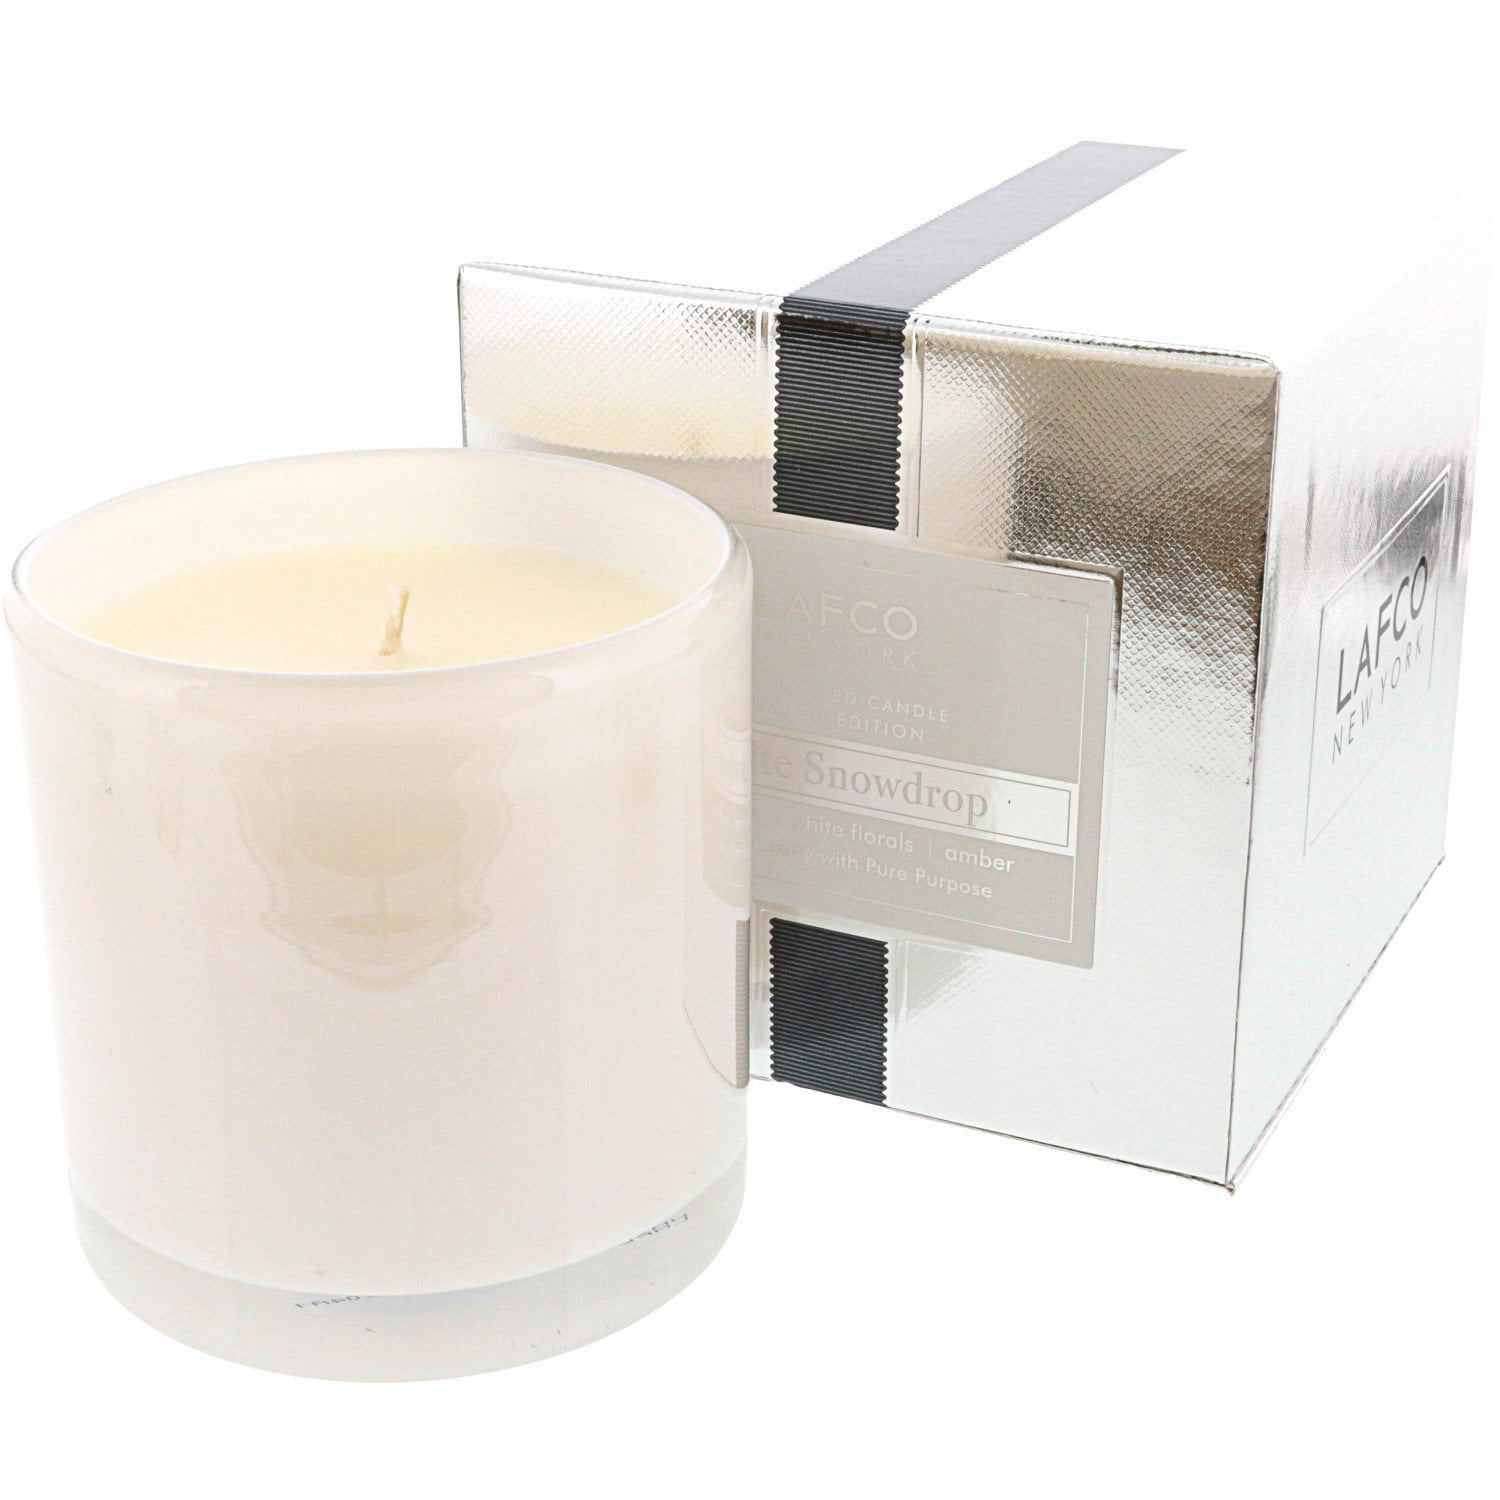 Snowdrops Soy Candle